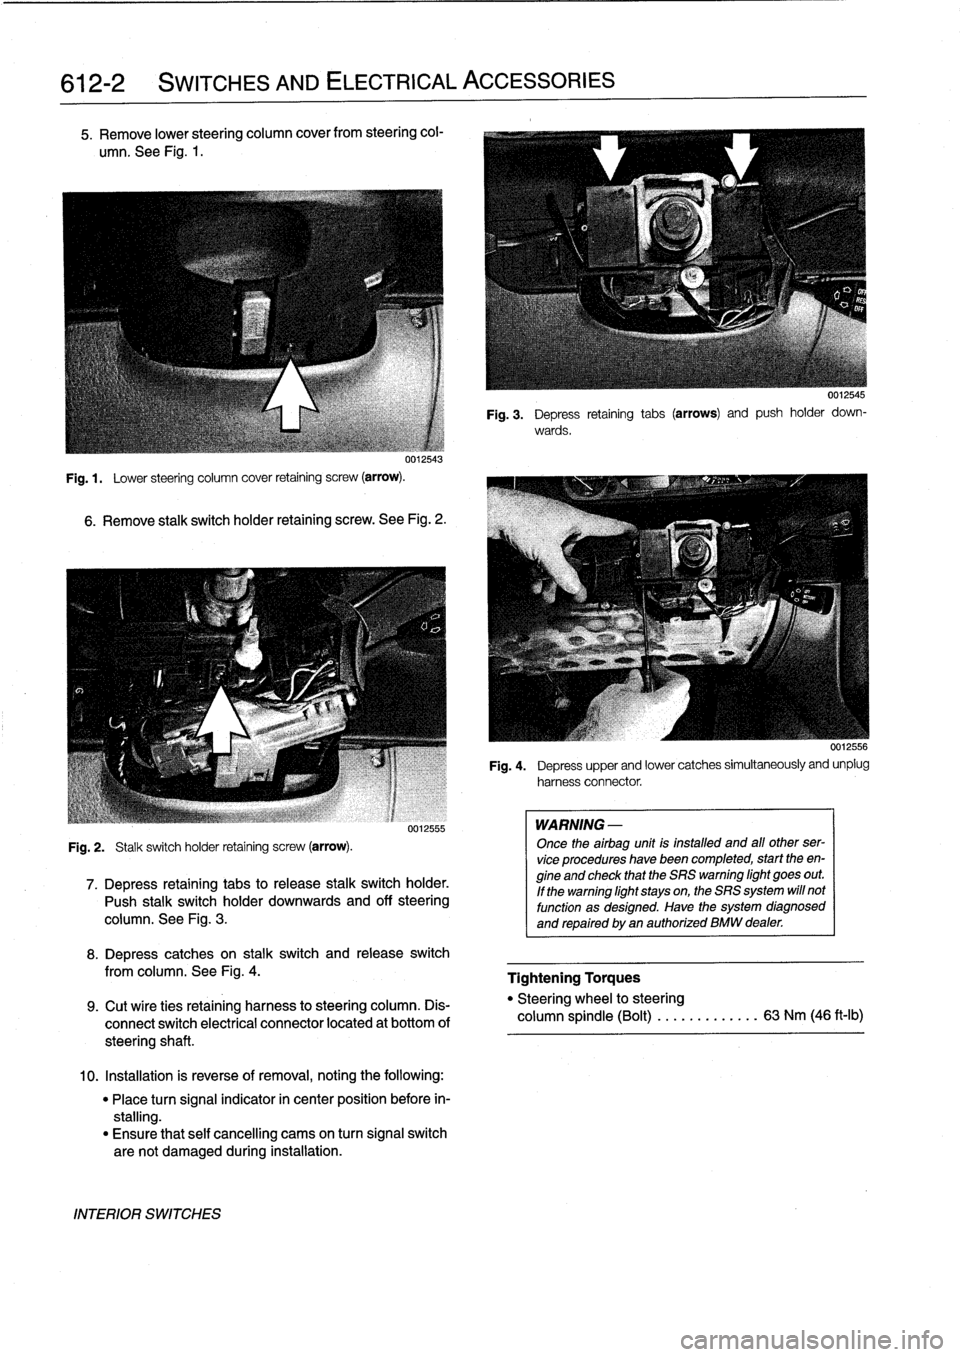 BMW 328i 1994 E36 Owners Guide 
612-2

	

SWITCHES
AND
ELECTRICAL
ACCESSORIES

5
.
Remove
lower
steering
column
cover
from
steering
col-

umn
.
See
Fig
.
1
.

uu12543

Fig
.
1
.

	

Lower
steering
column
cover
retaining
screw
(arro